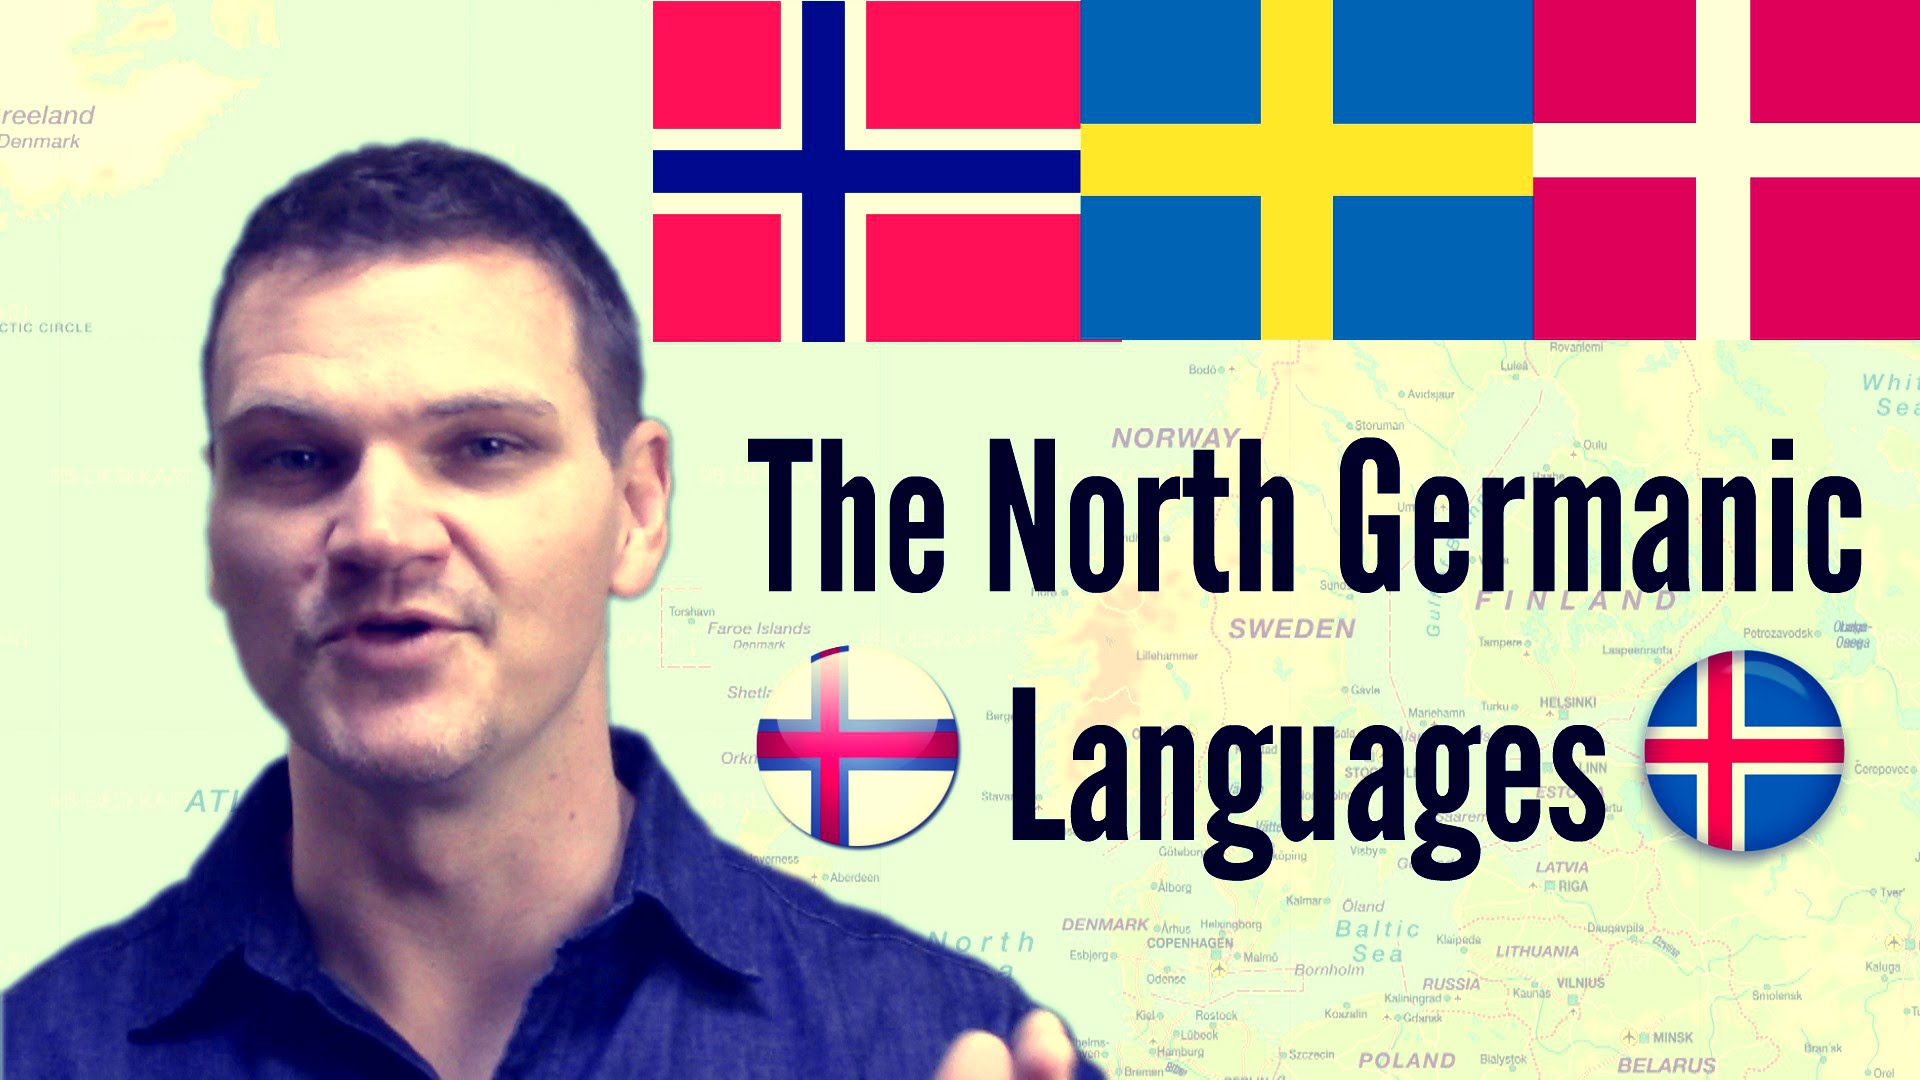 The North Germanic Languages of the Nordic Nations